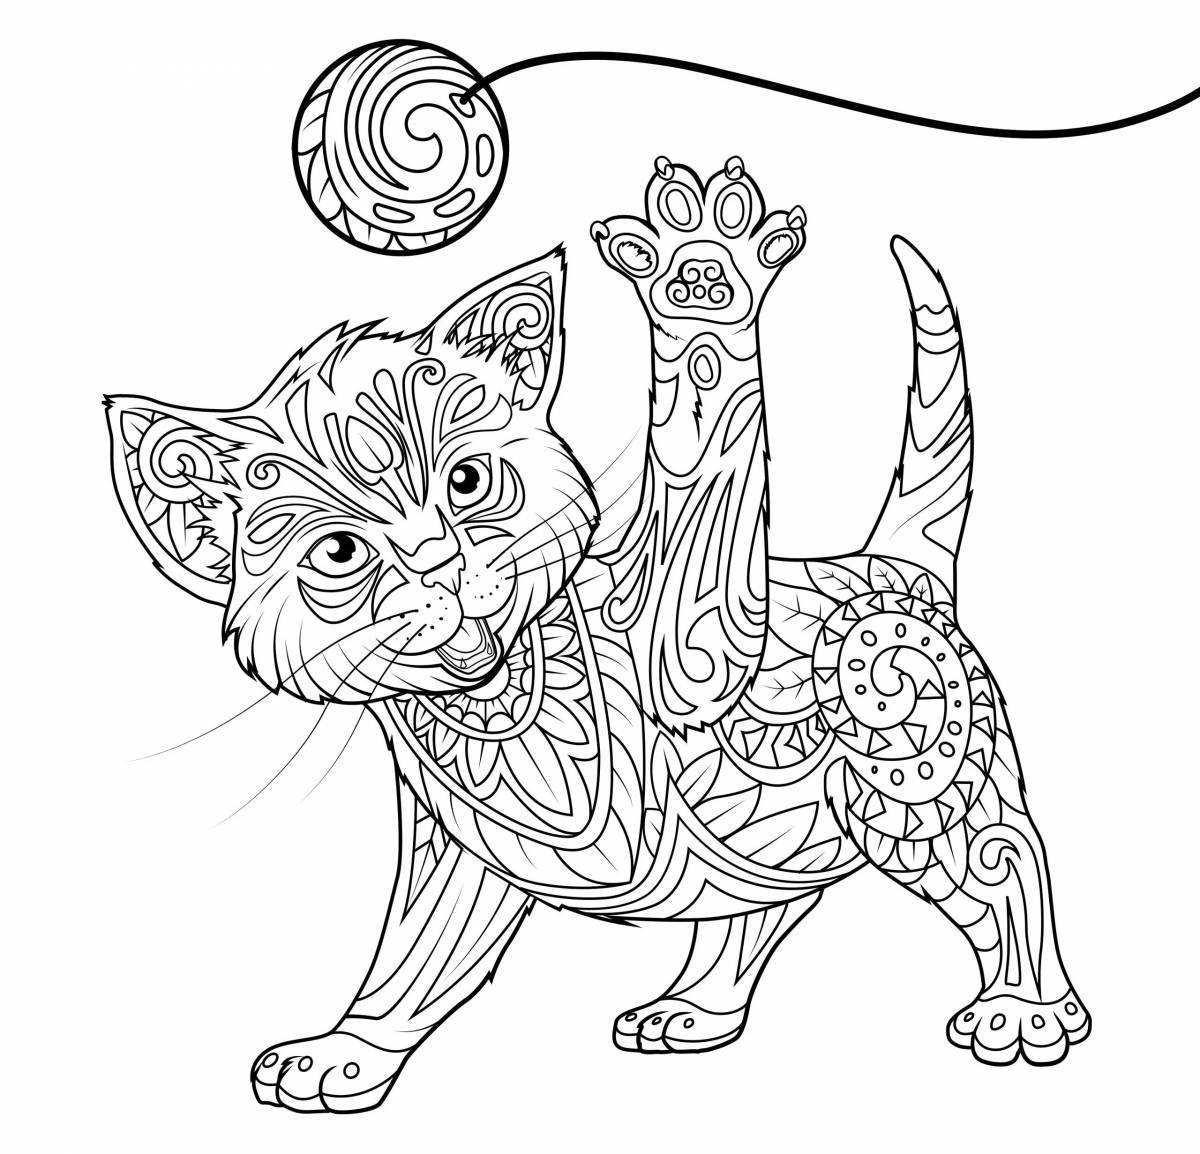 Sweet antistress coloring book for cat girls